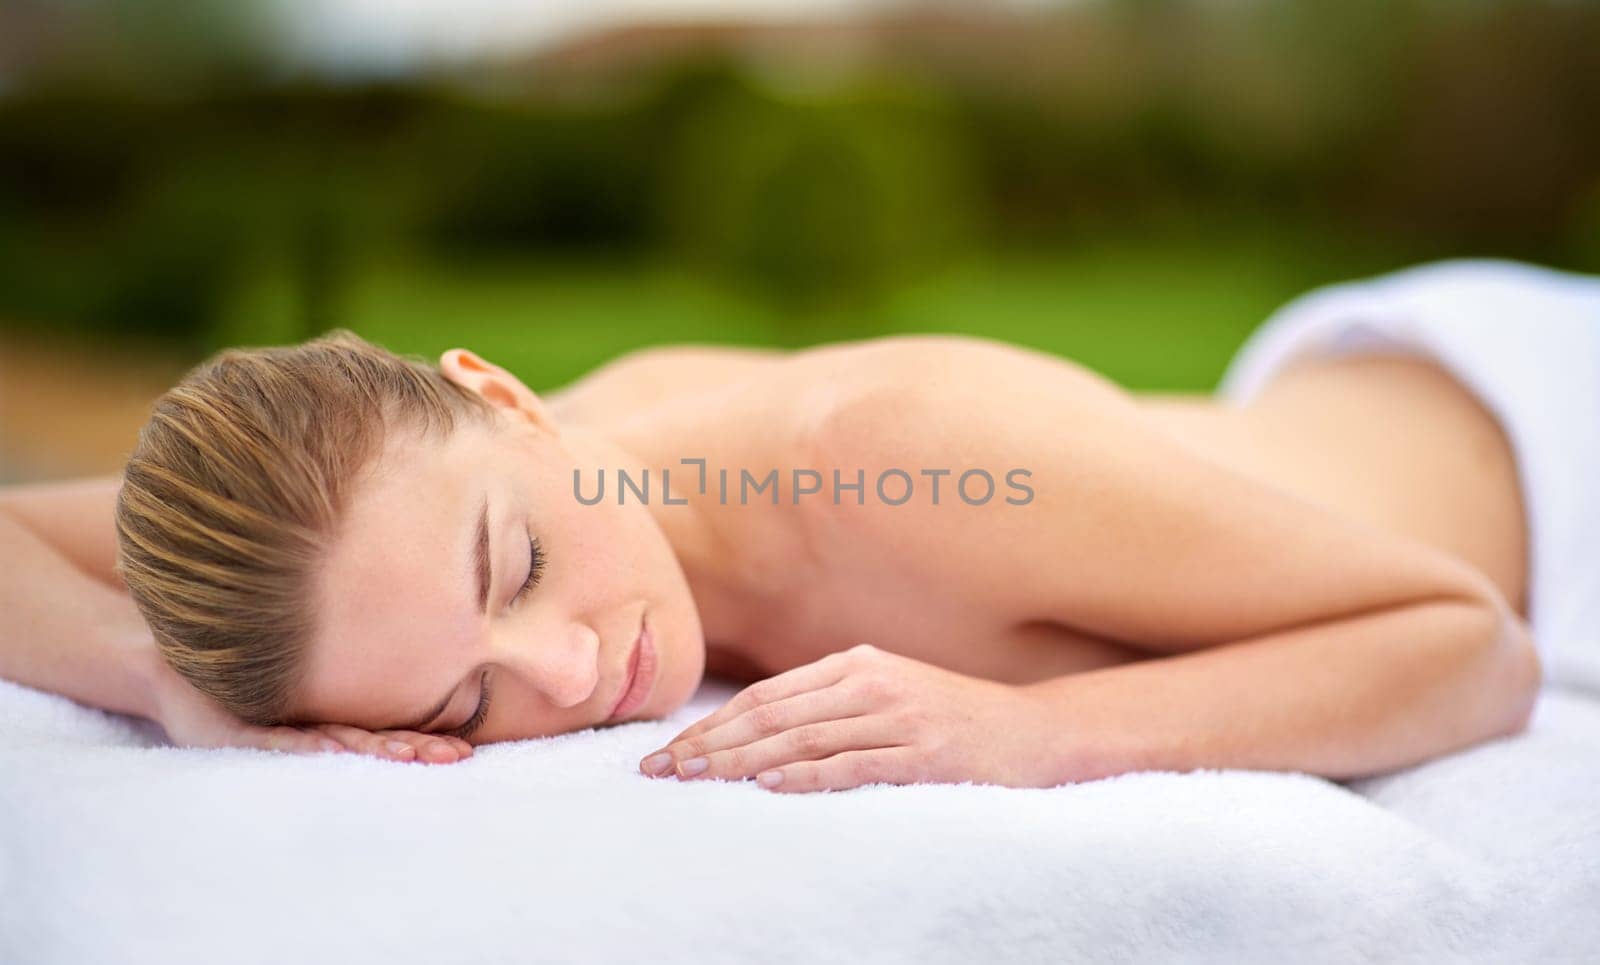 Spa, relax and massage with woman on bed for healing, treatment or pamper in peace at luxury hotel. Female person, client and sleeping with body care at resort for wellness, peace or rest on vacation.